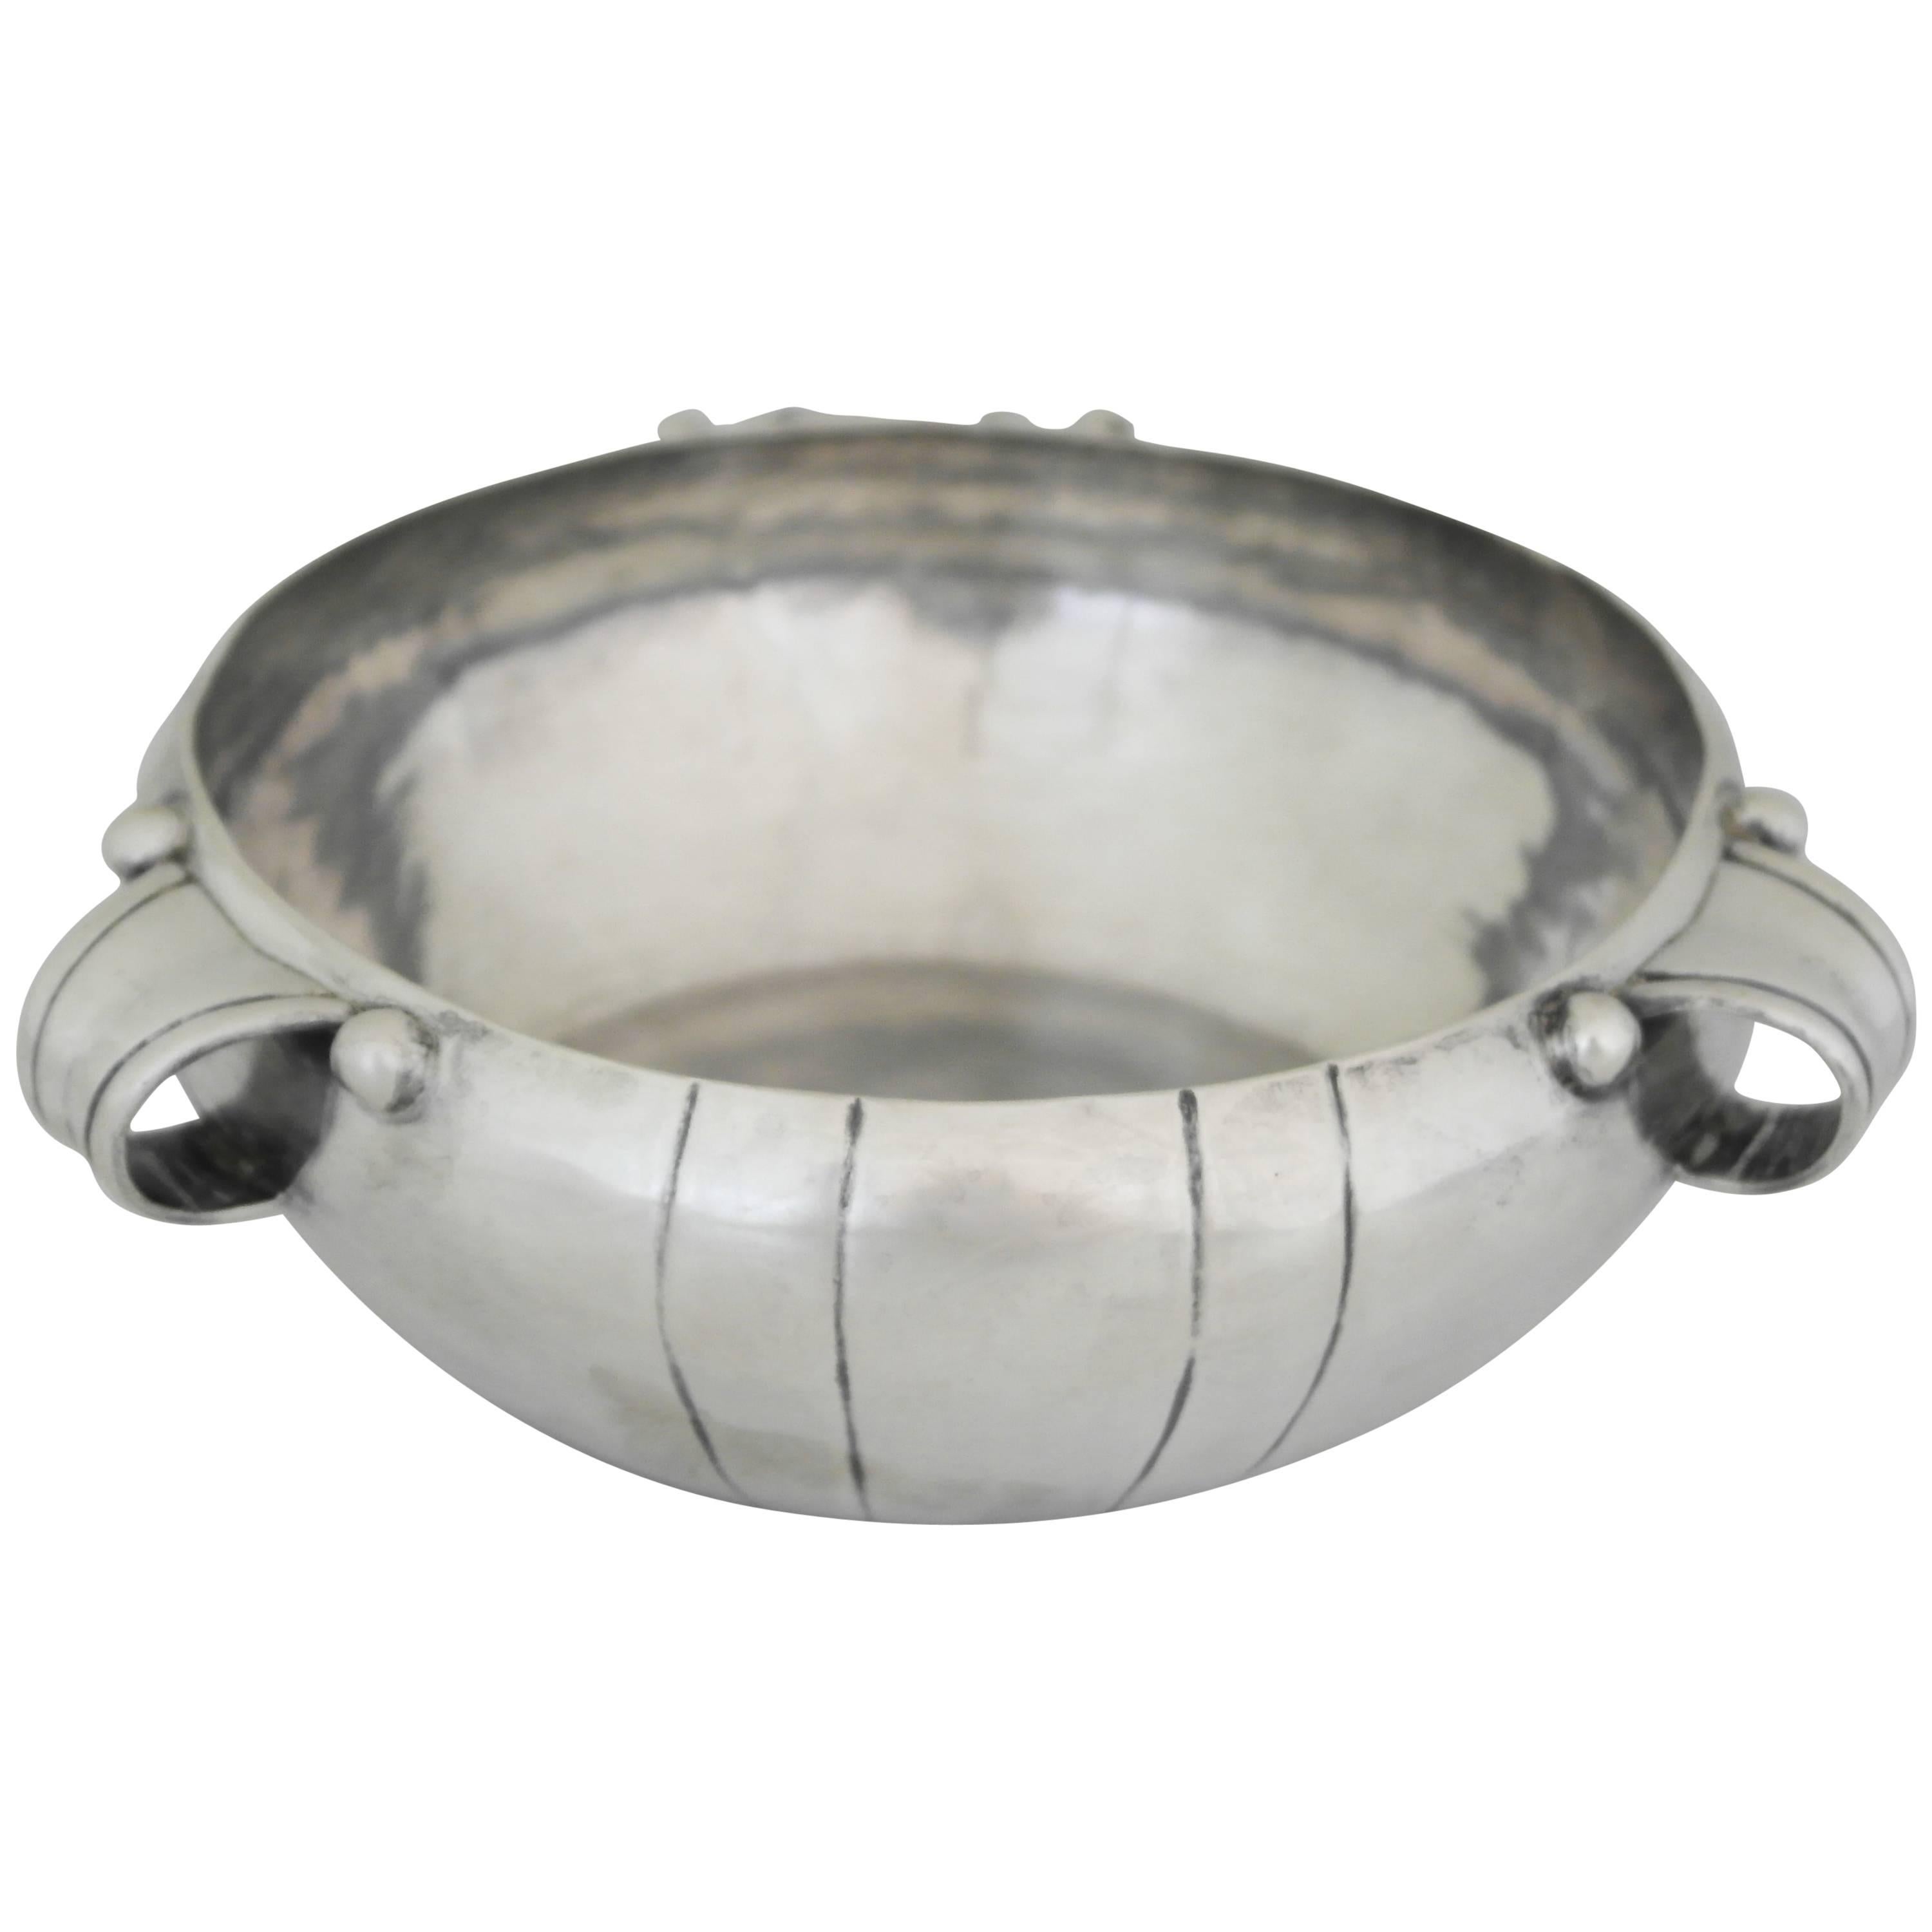 William Spratling Hand-Wrought Sterling Silver Bowl